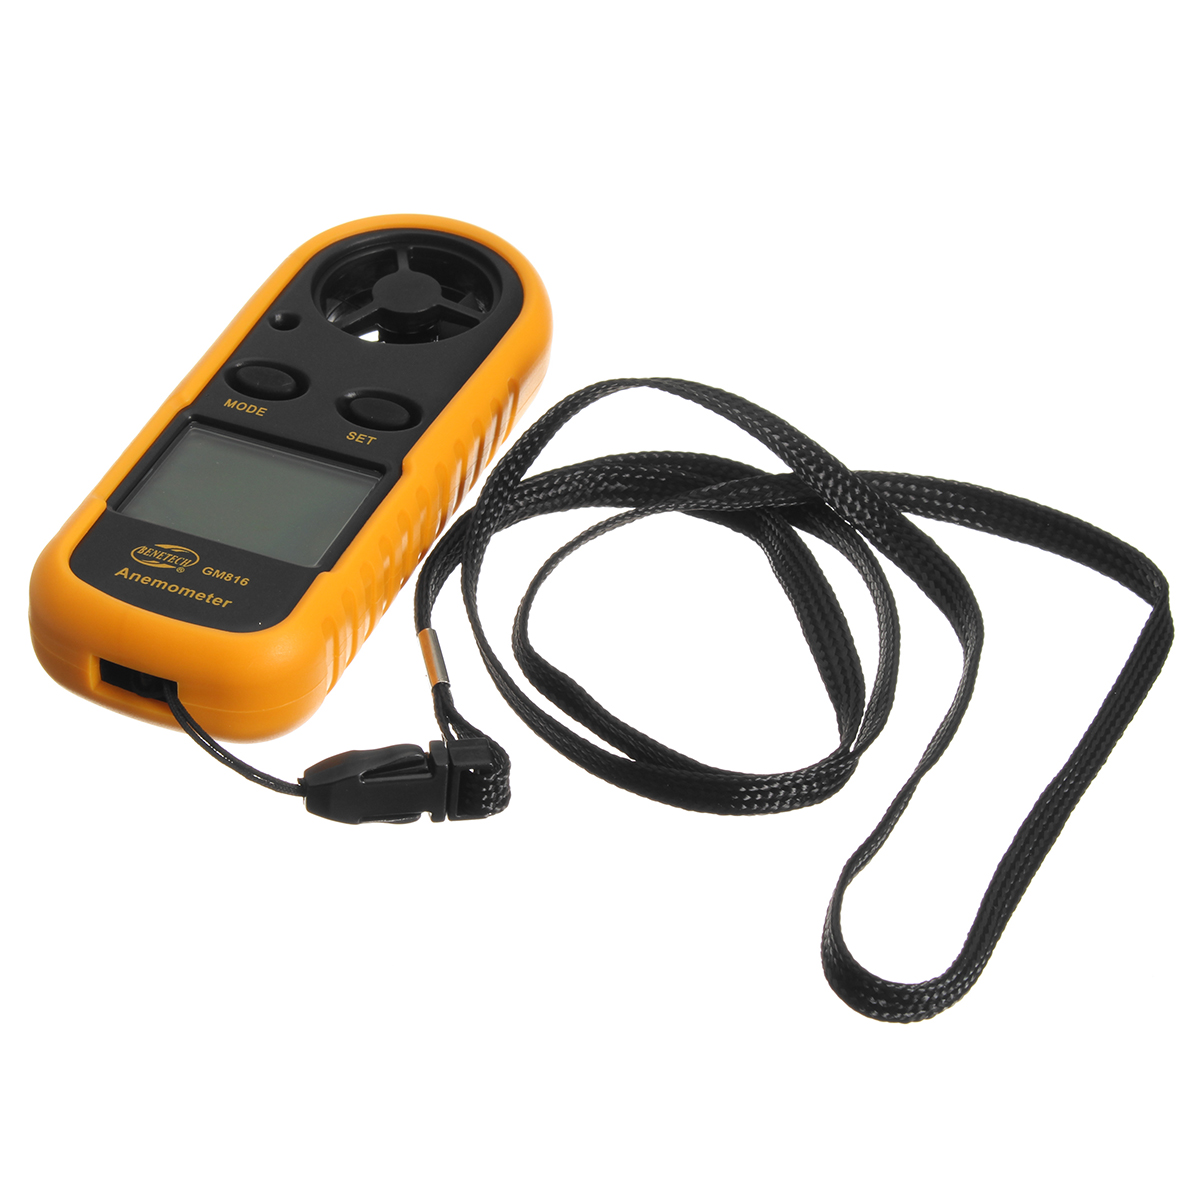 Digital-LCD-Anemometer-Thermometer-Air-Wind-Speed-Meter-Temperature-Tester-1277544-7